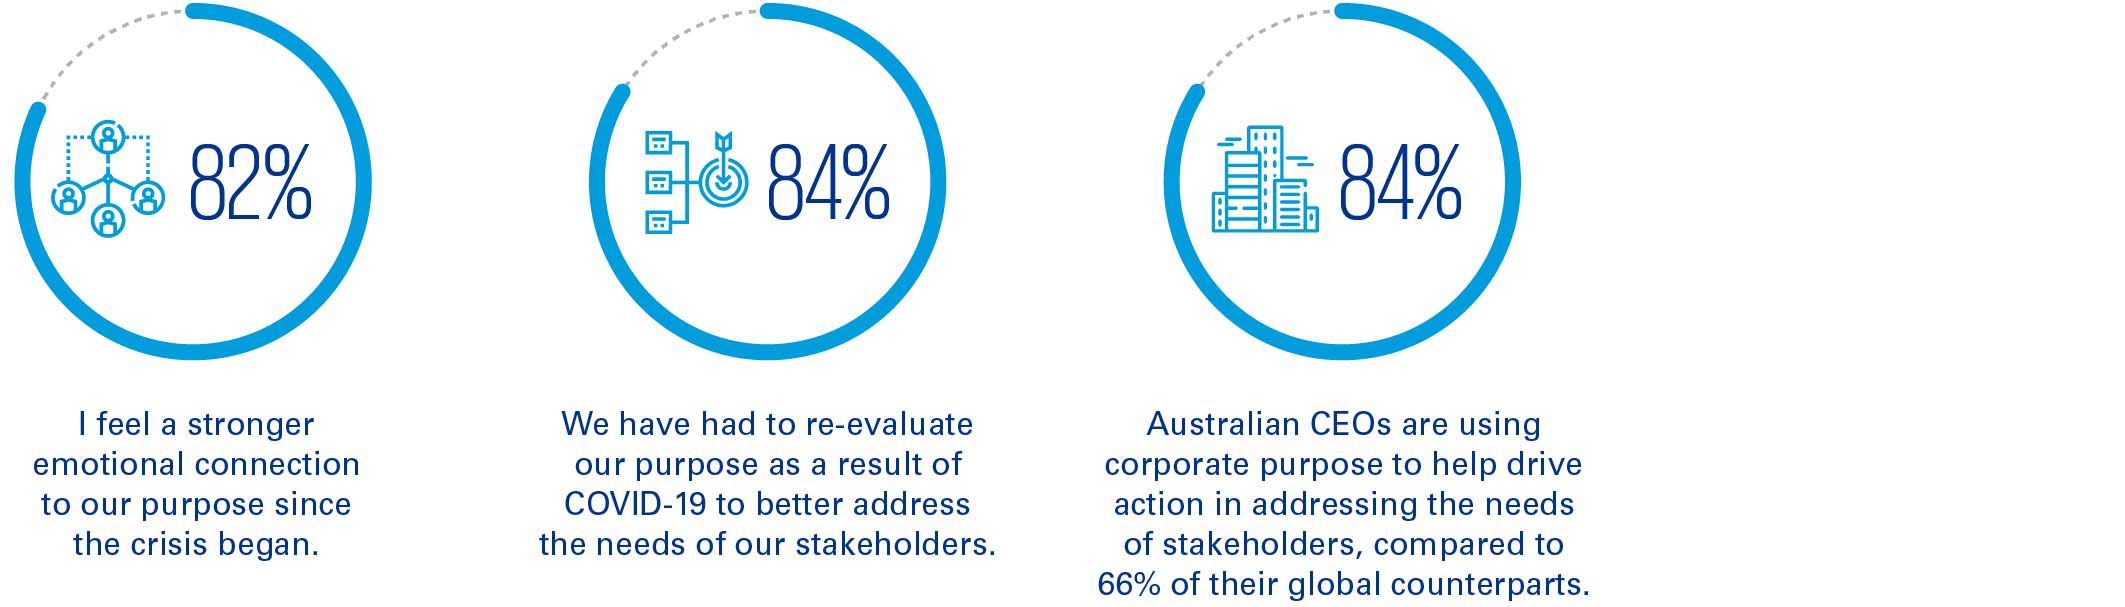 Global CEO Outlook 2020: Purpose infographic